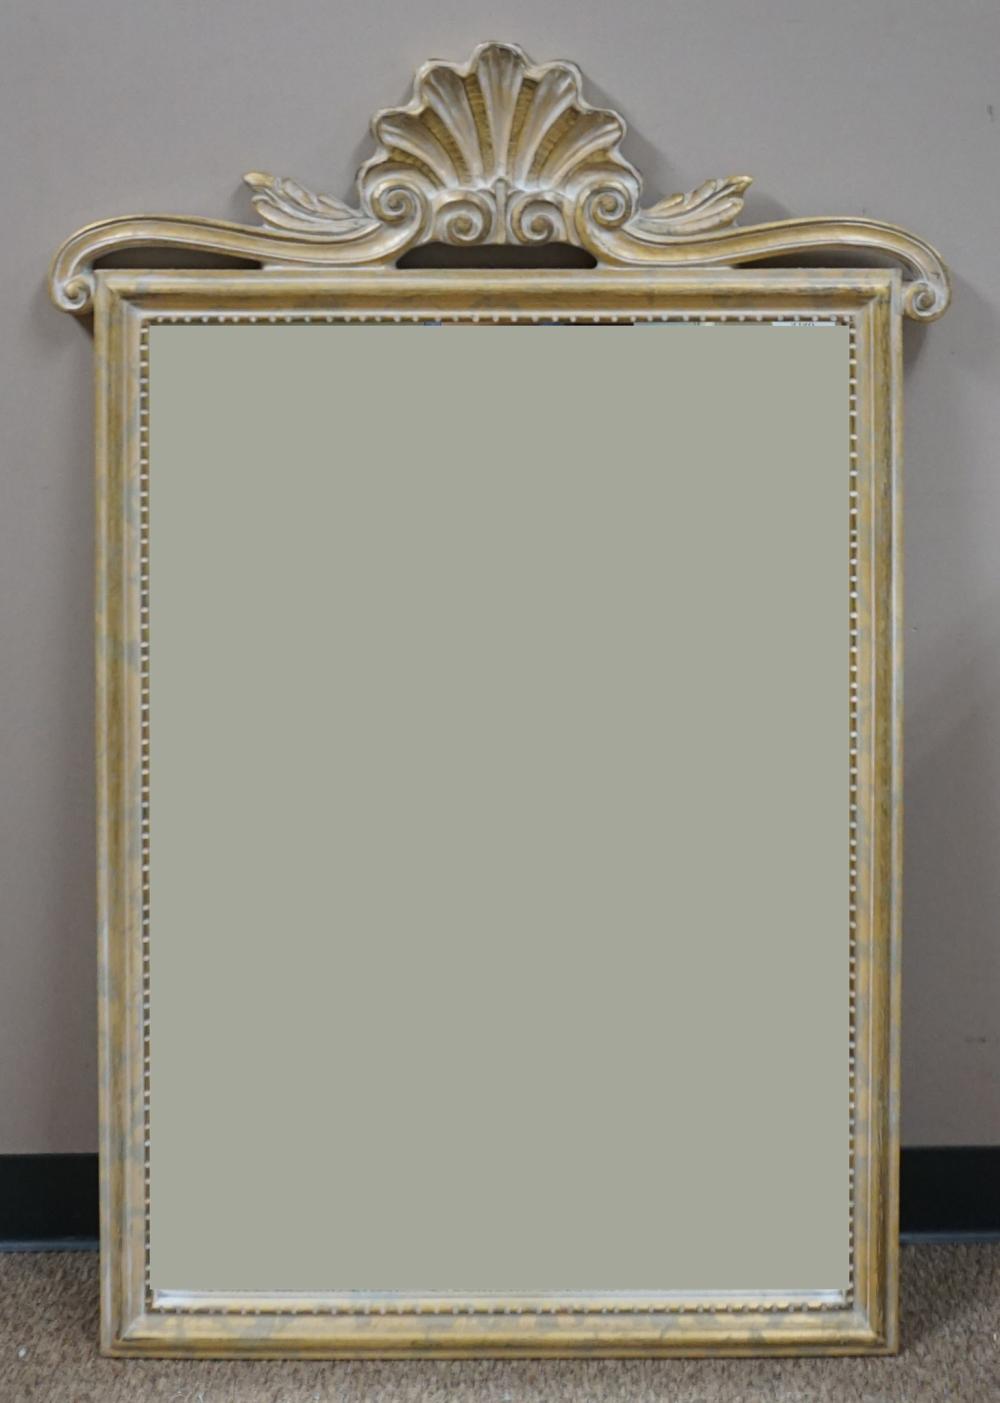 LOUIS XV STYLE DISTRESSED PAINTED 2e4b57